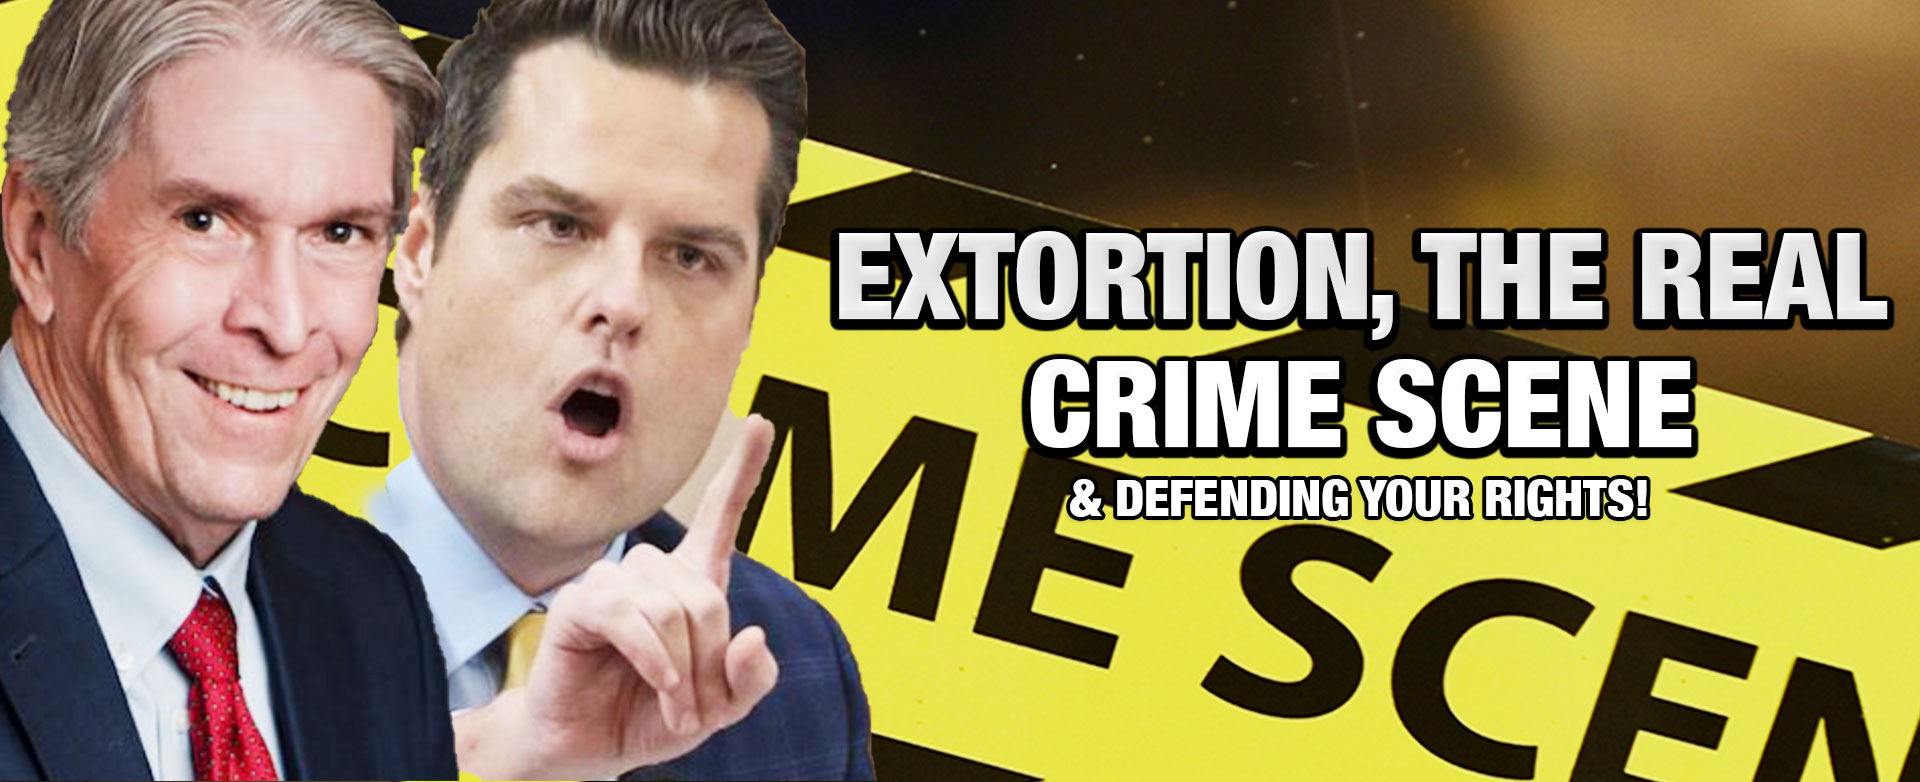 MyPatriotsNetwork-Extortion, The Real Crime Scene & Defending Your Rights! March 31 2021 Update